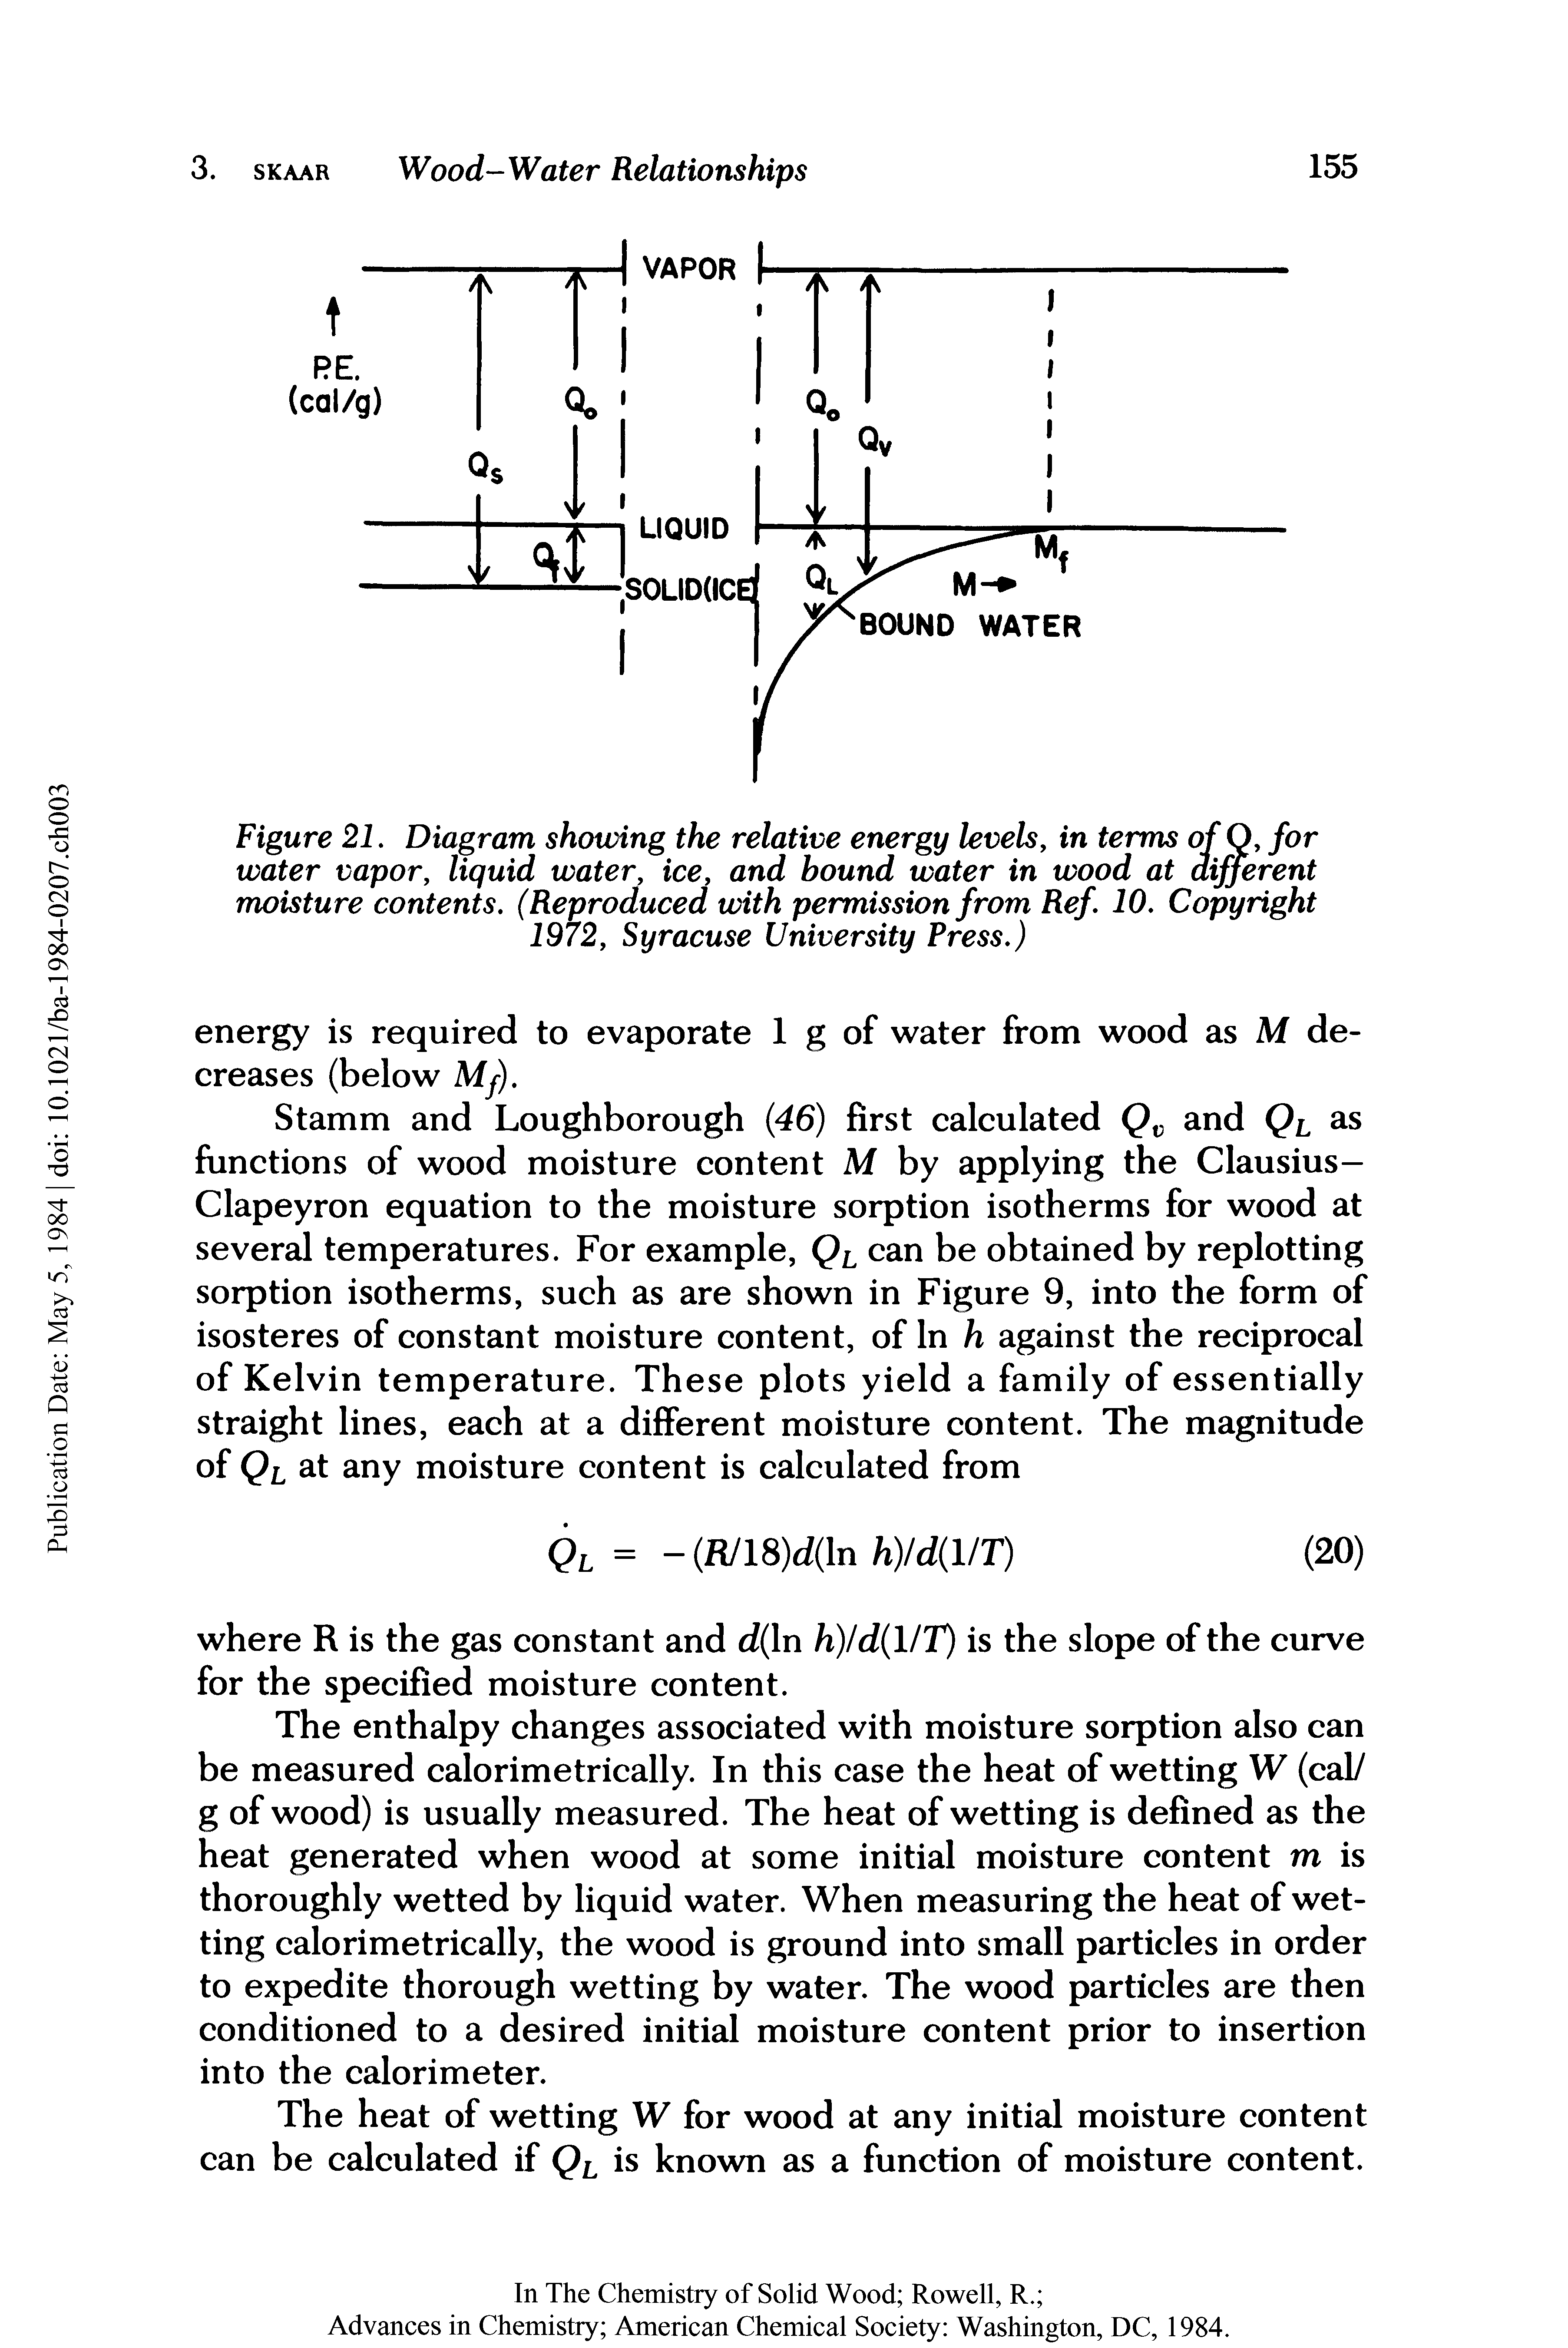 Figure 21. Diagram showing the relative energy levels, in terms of Q, for water vapor, liquid water, ice, and bound water in wood at different moisture contents, (Reproduced with permission from Ref. 10. Copyright 1972, Syracuse University Press.)...